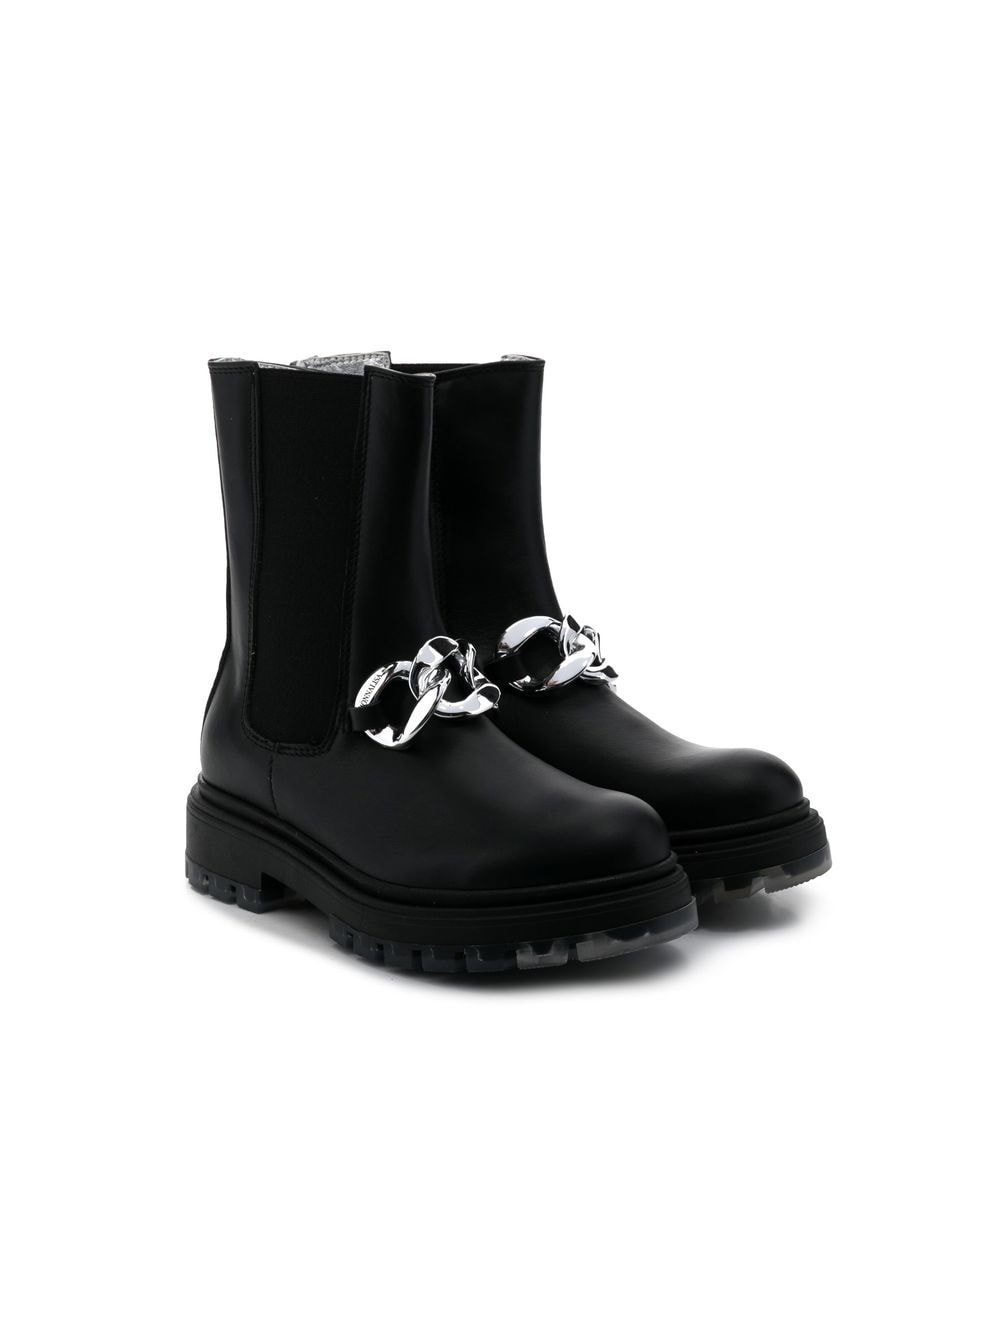 Image 1 of Monnalisa chunky-chain detail boots